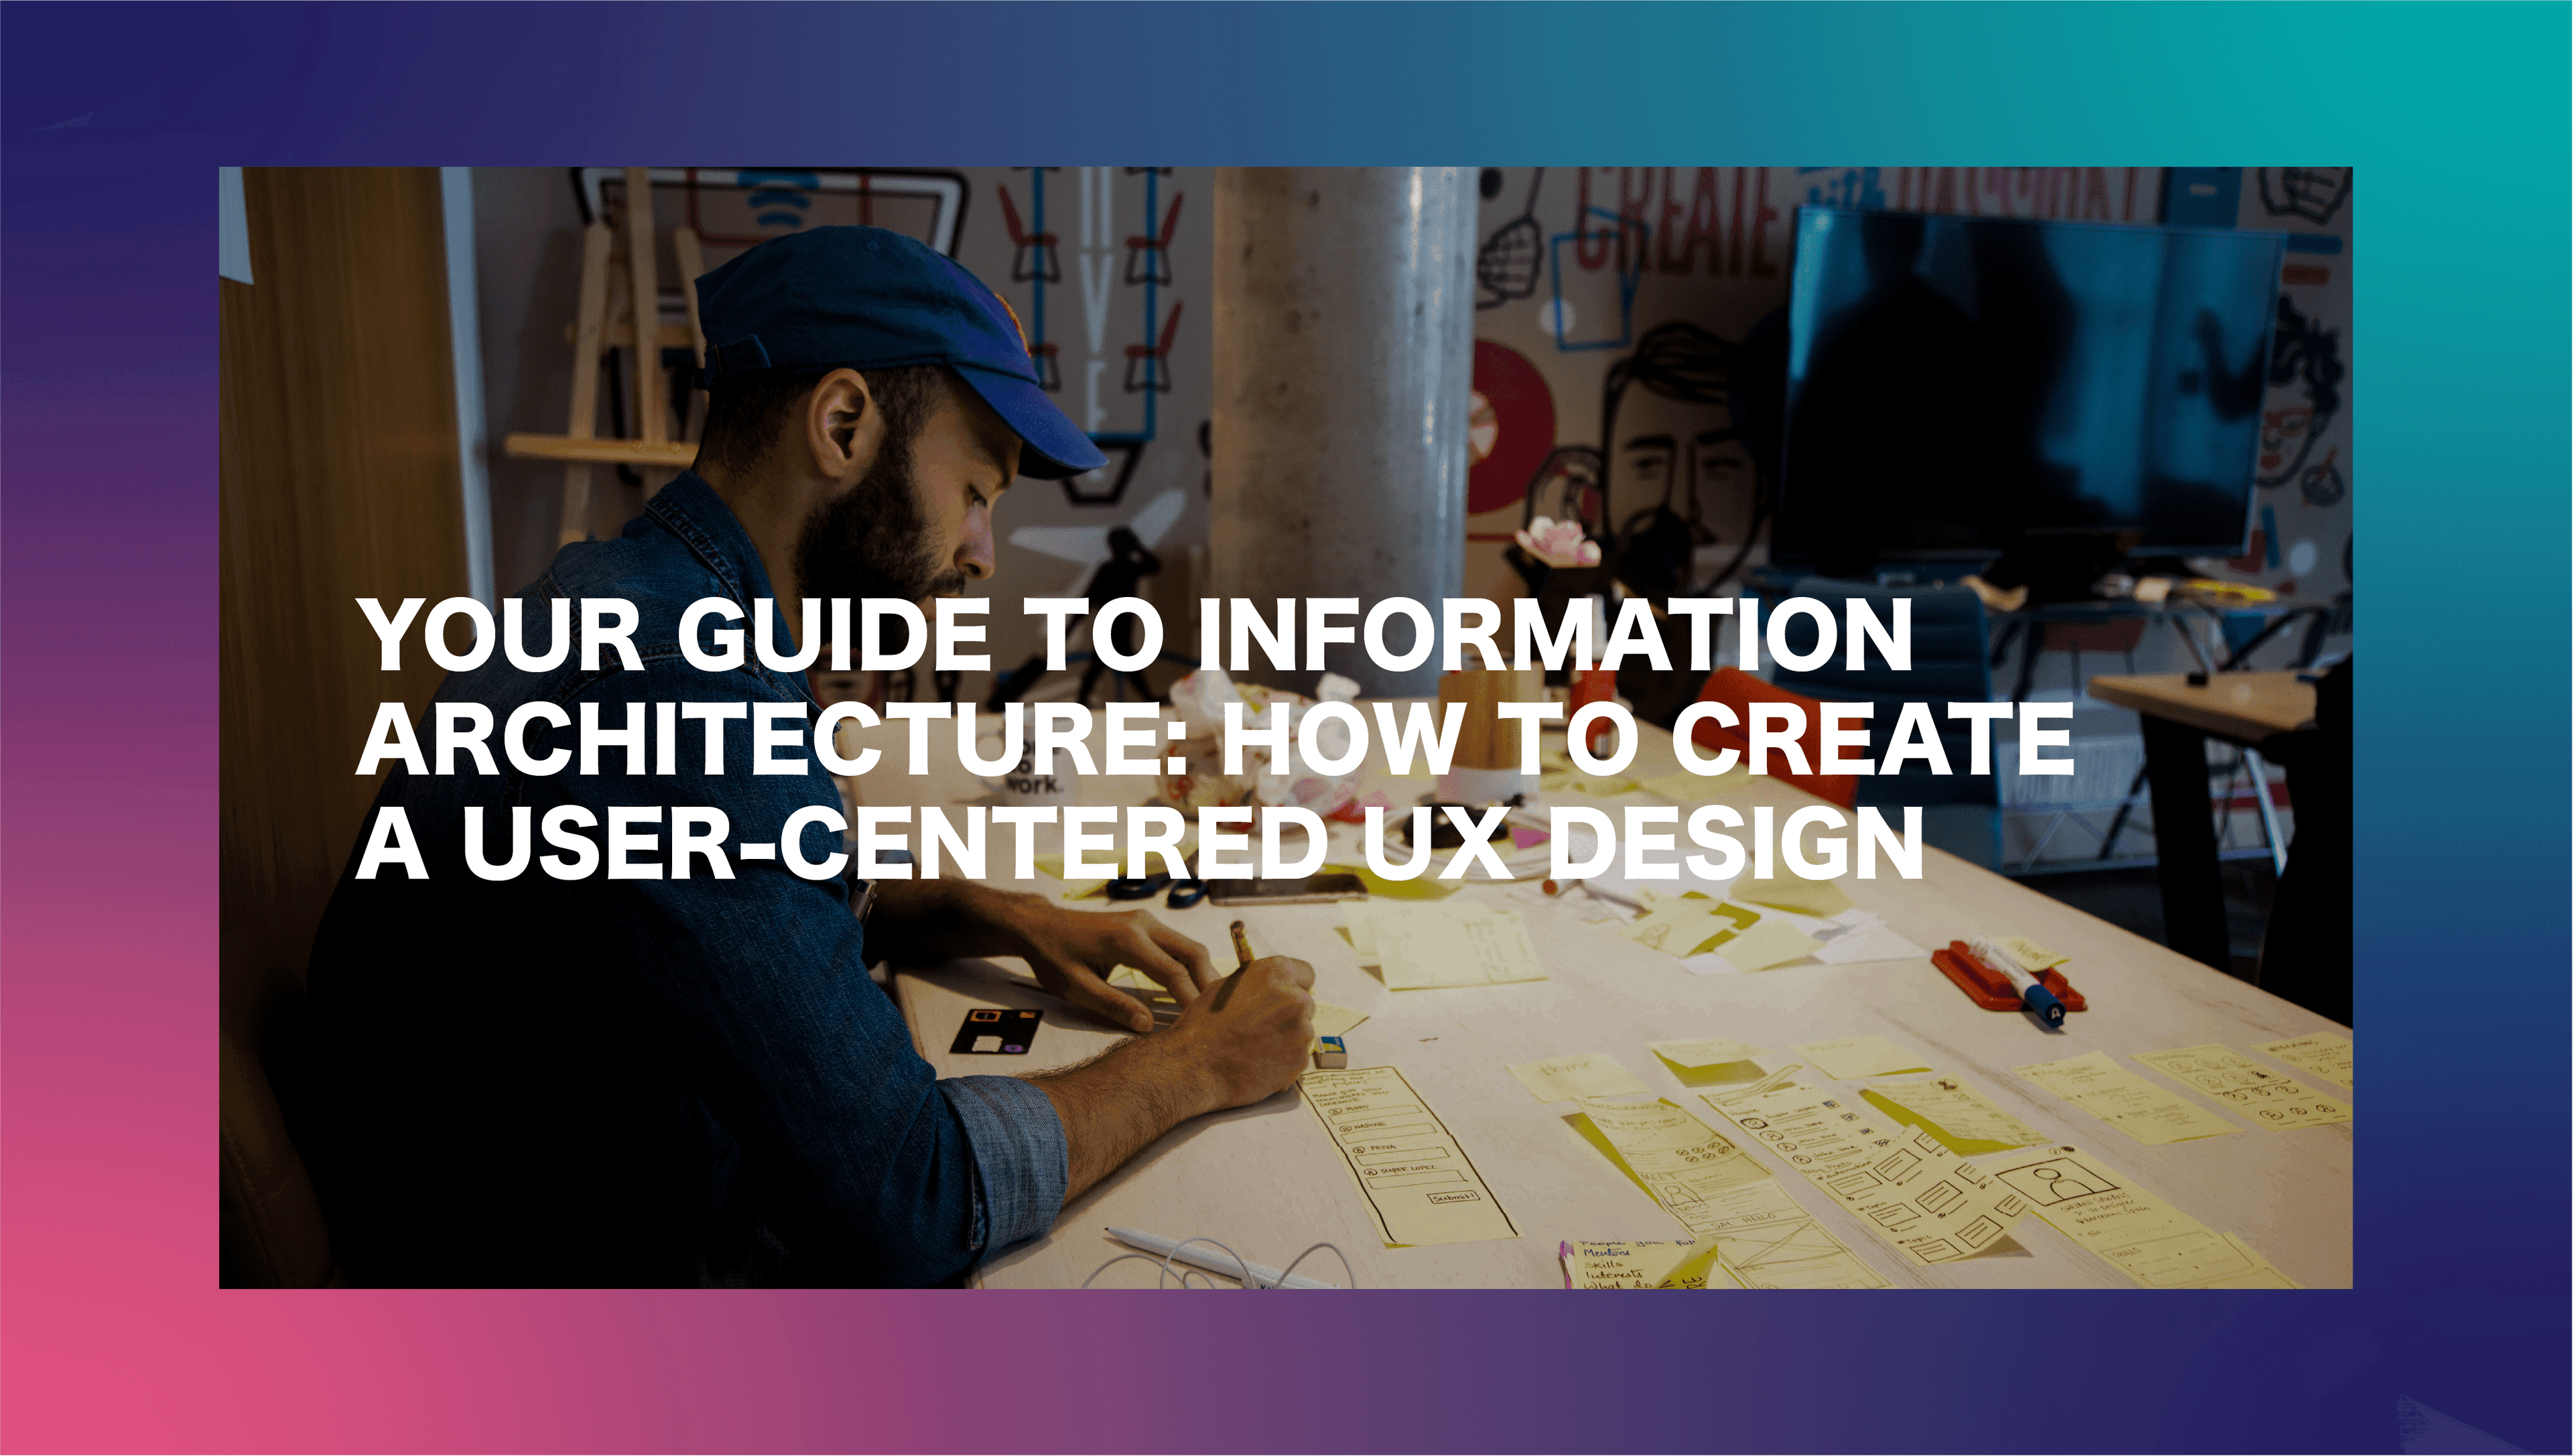 Your guide to information architecture how to create a user centered UX design